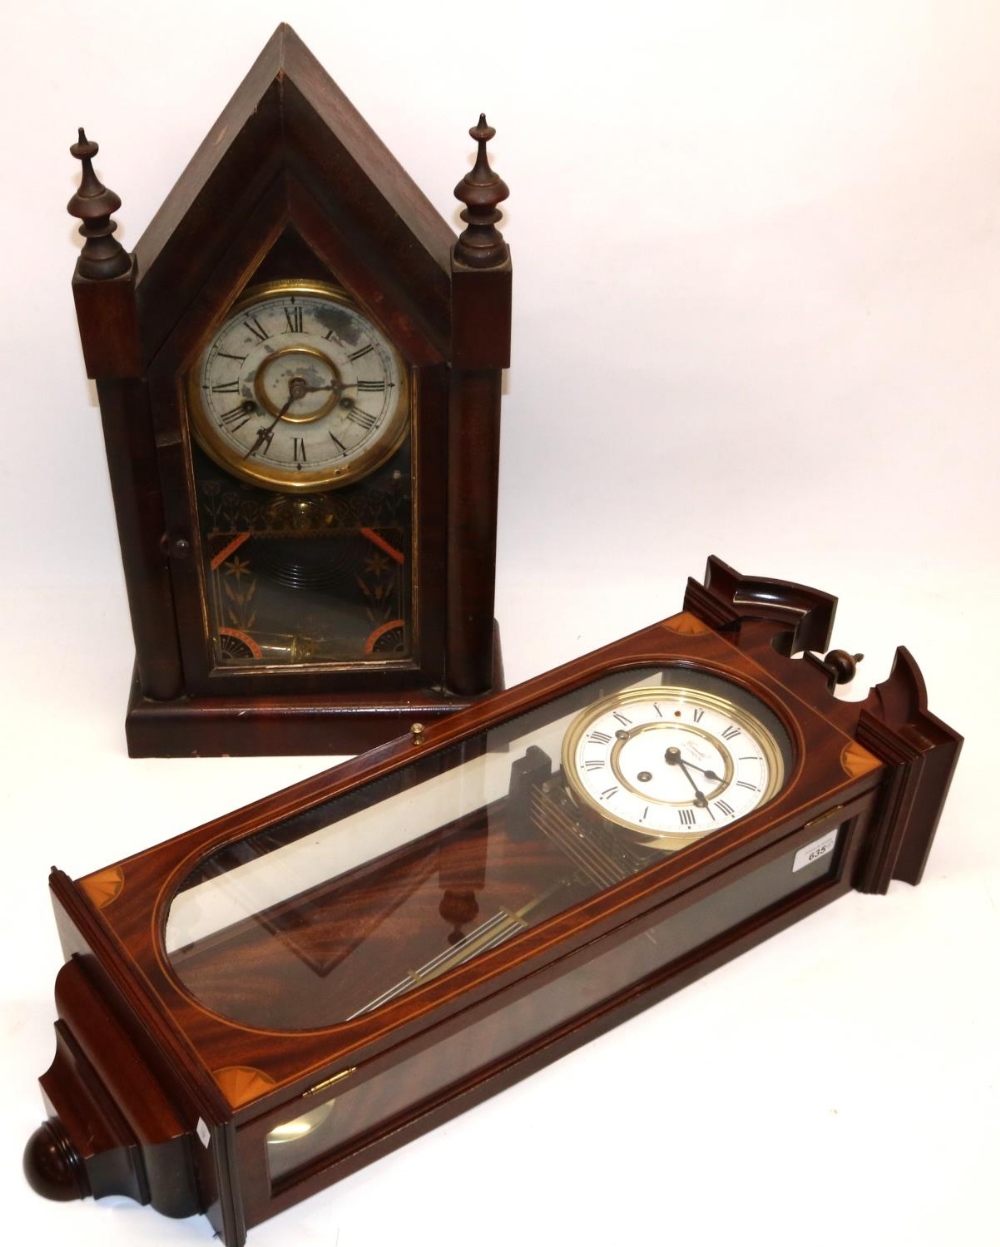 Comitti of London, inlaid mahogany Vienna style wall clock, moulded swan neck pediment over full